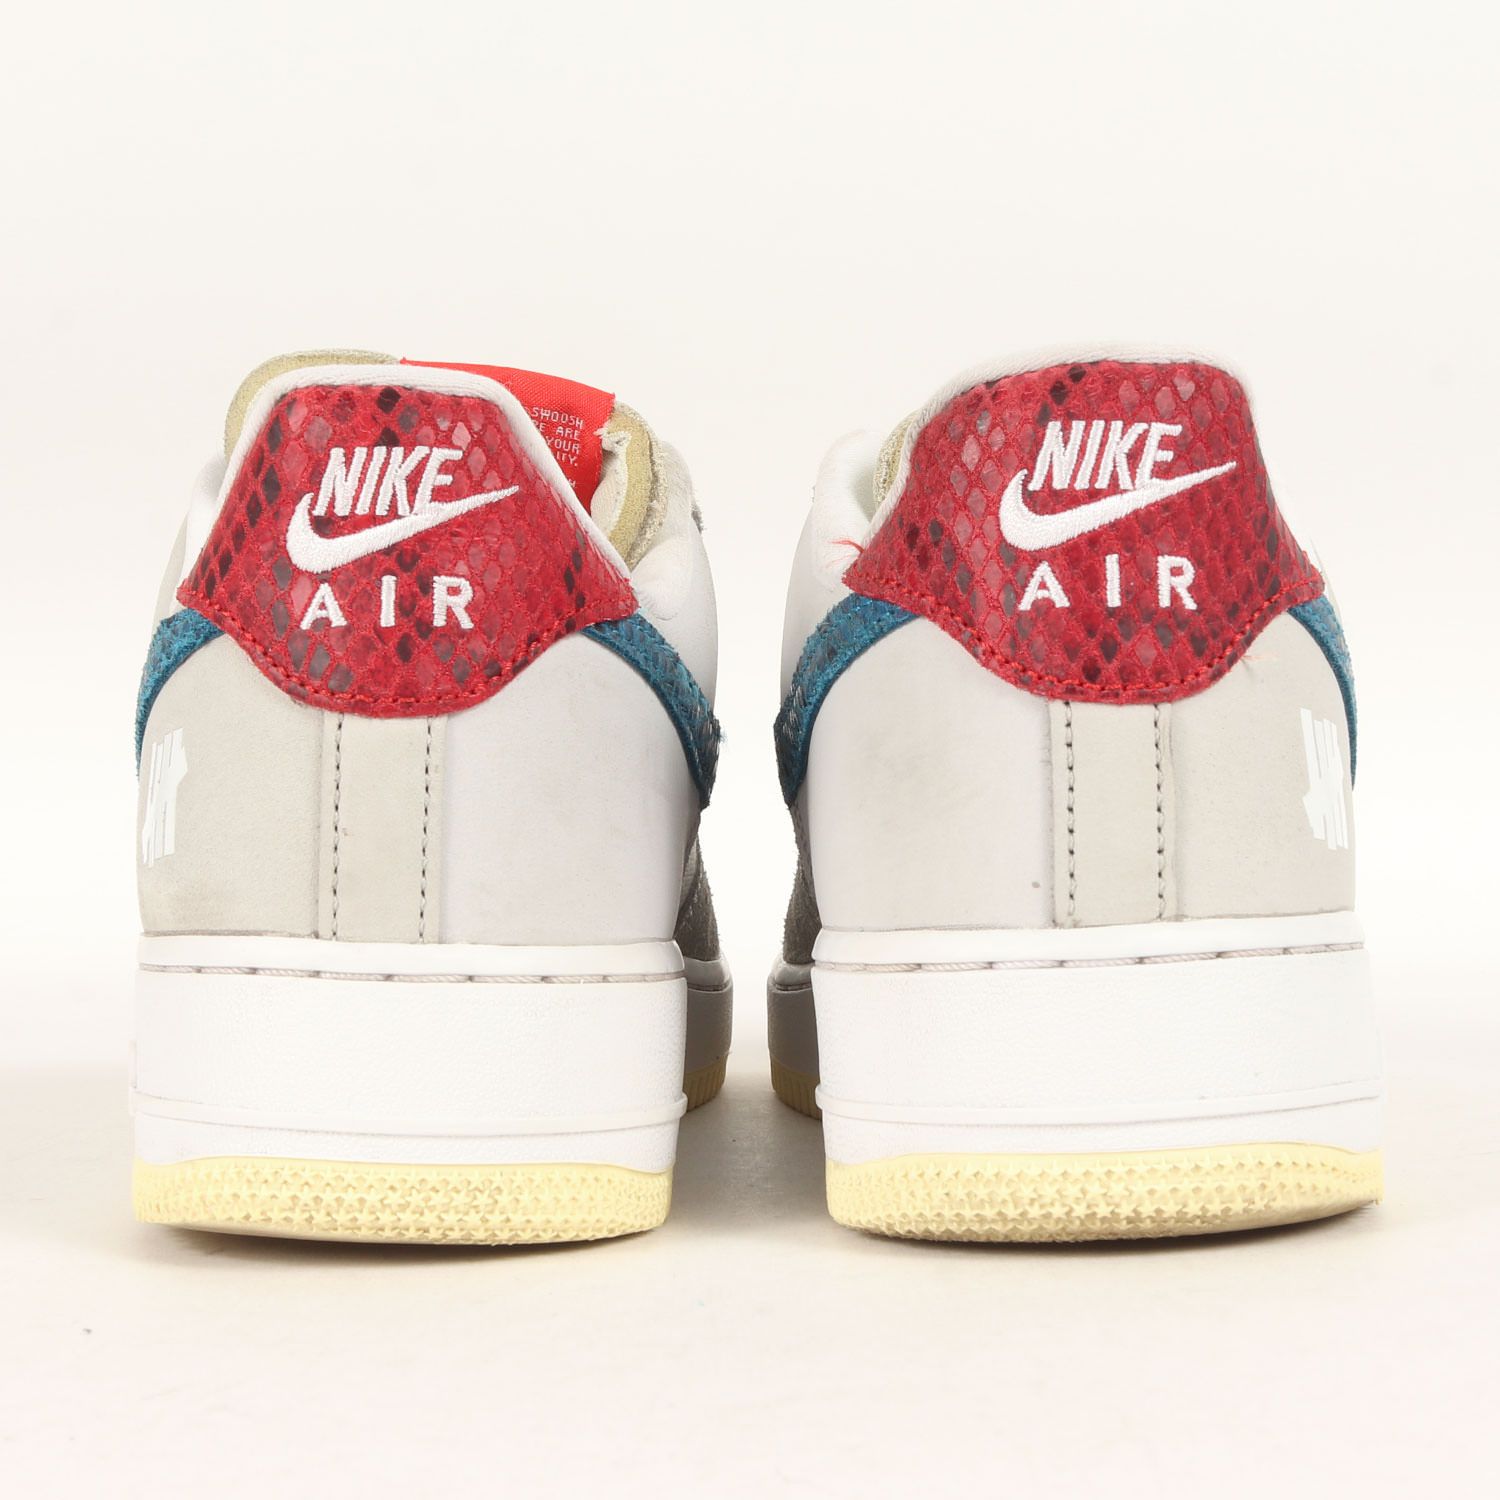 NIKE ナイキ サイズ:27.5cm UNDEFEATED AIR FORCE 1 LOW SP 5 ON IT ...